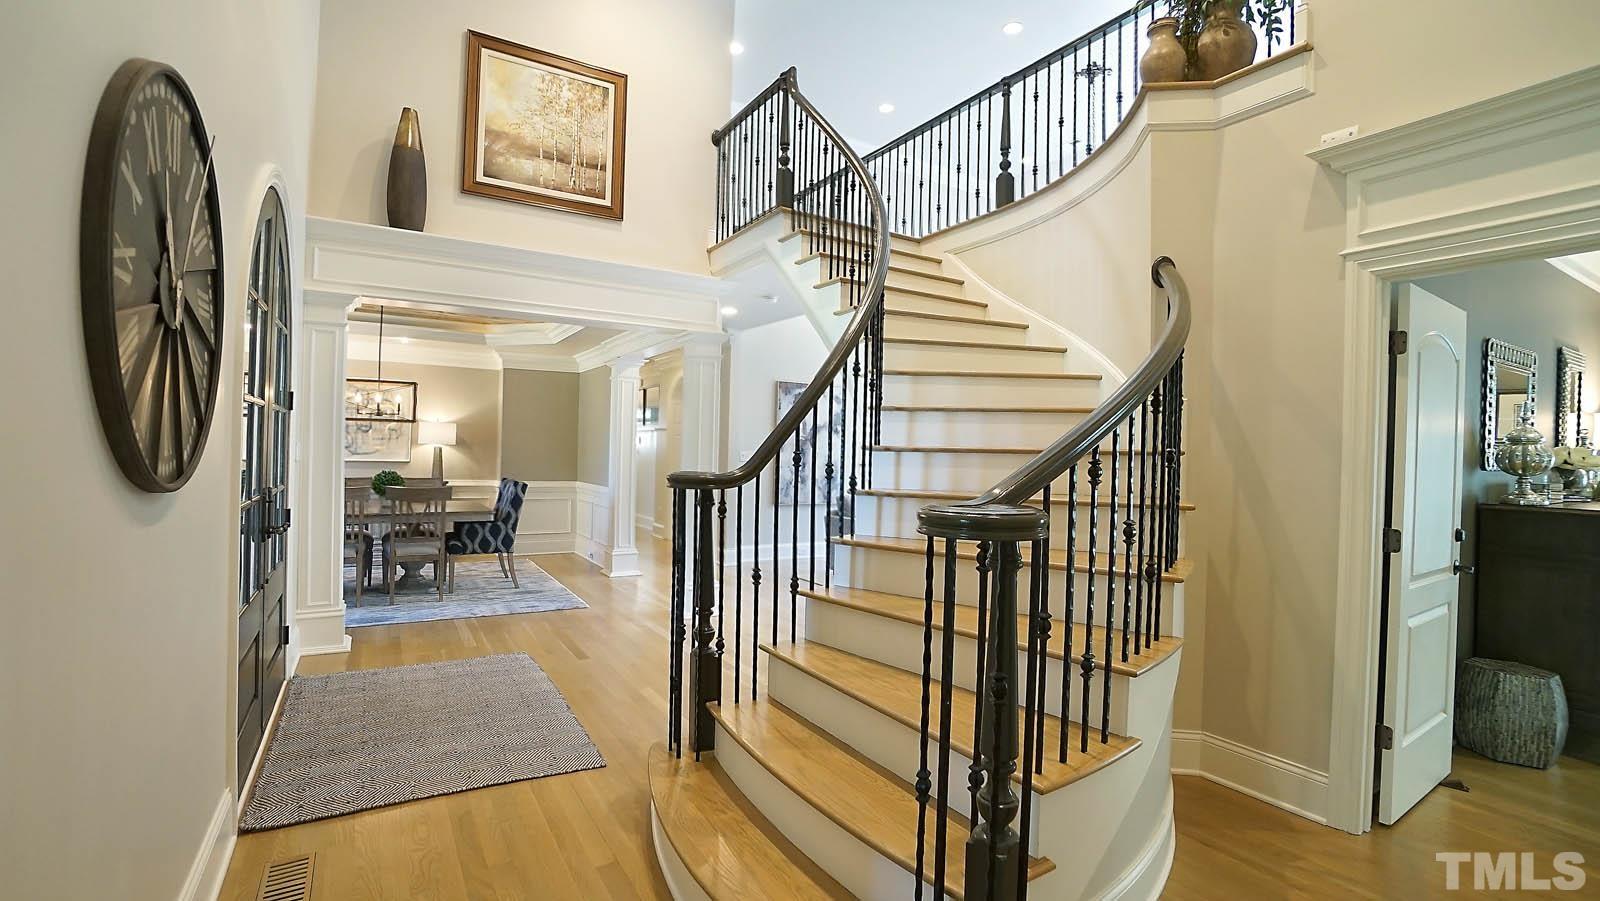 Gorgeous curved staircase with iron balusters and catwalk overlooking family room